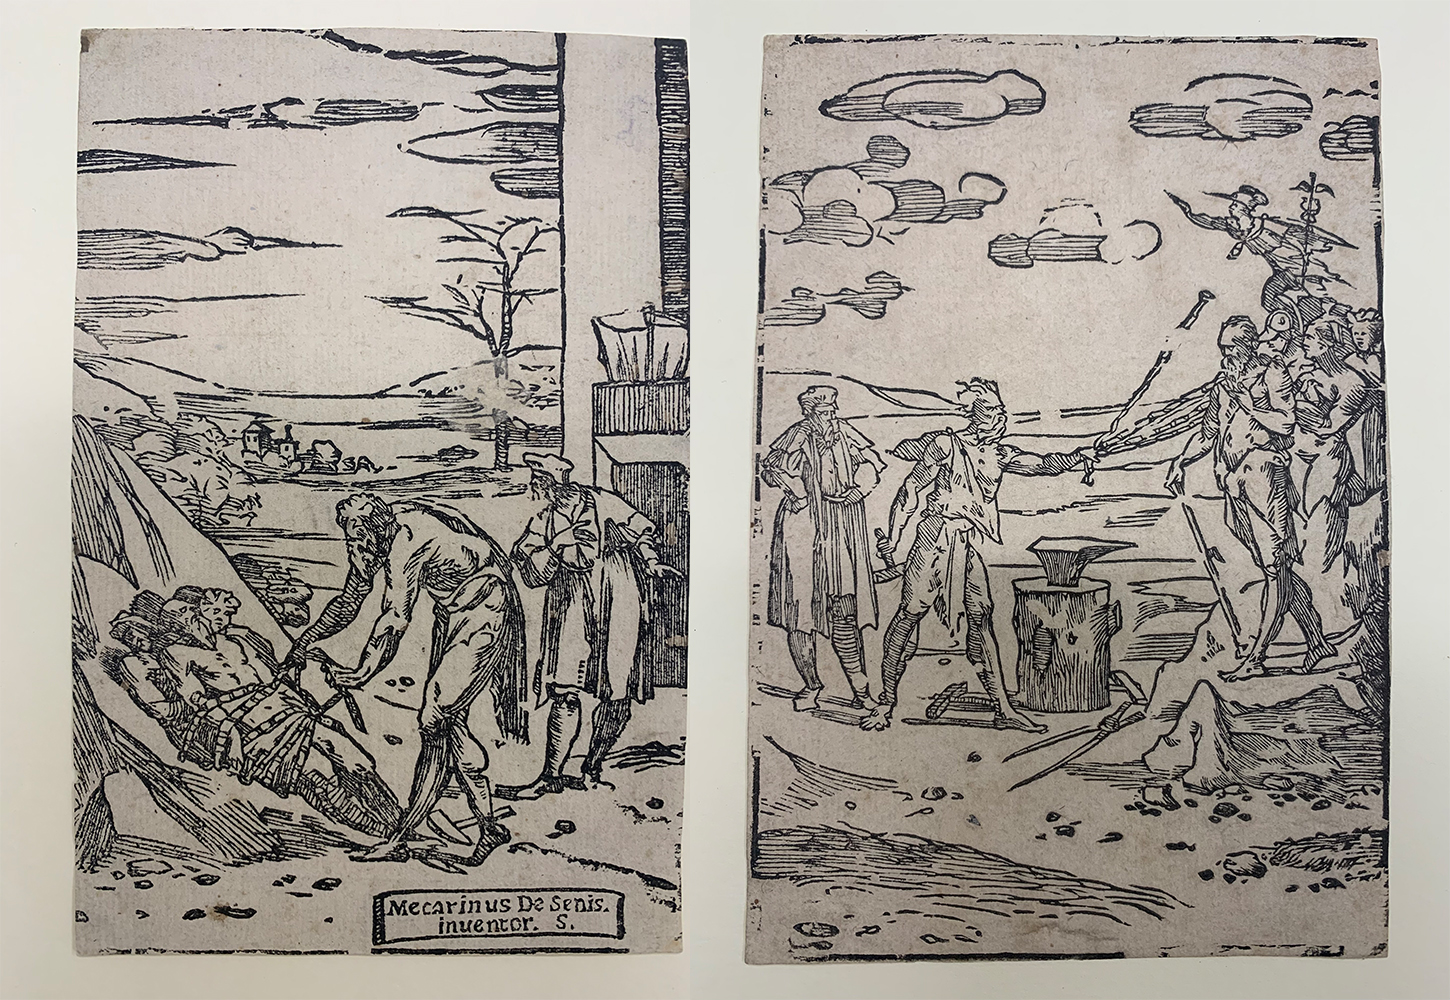 Image of two woodcuts by Domenico Beccafumi (1484-1551), The Barber, ca. 1525-40 (left) and The Blacksmith, ca. 1525-40 (right)